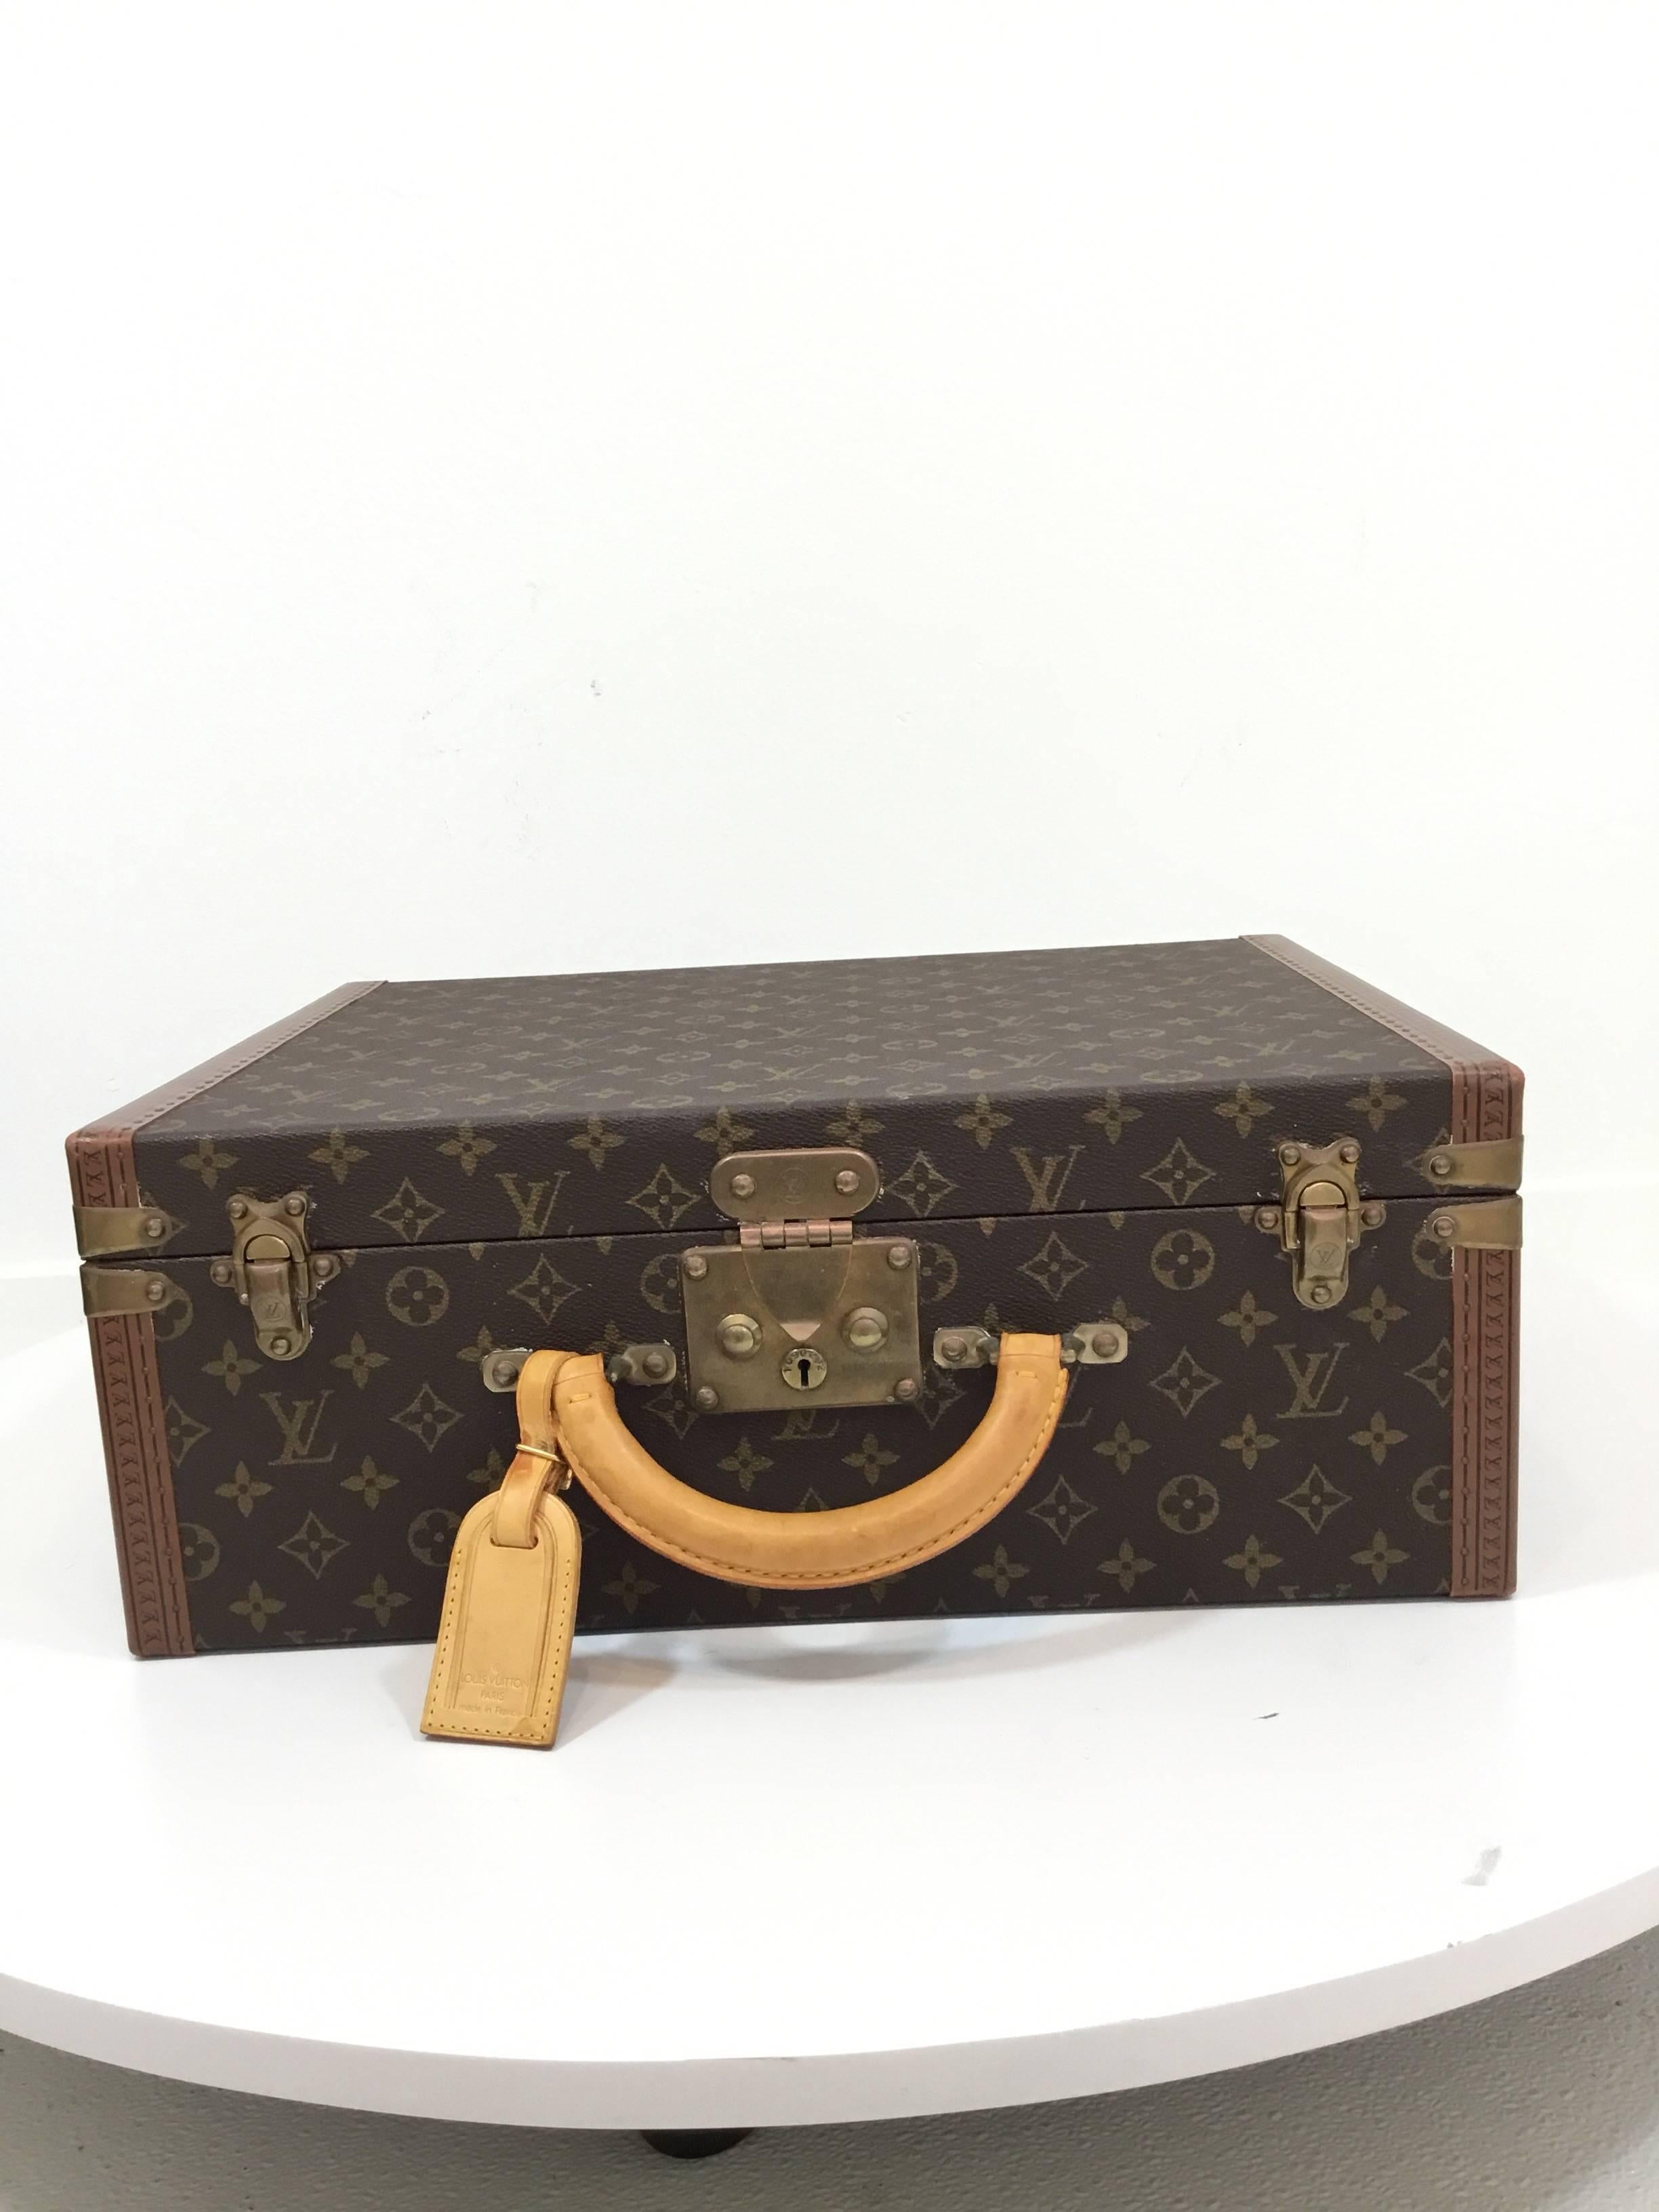 Brown and tan Louis Vuitton monogram coated canvas Super President briefcase with brass hardware, vachetta leather top handle and double flip-lock and center push-lock closure. Green Taiga leather detailed interior. Green cloche with key. Exterior